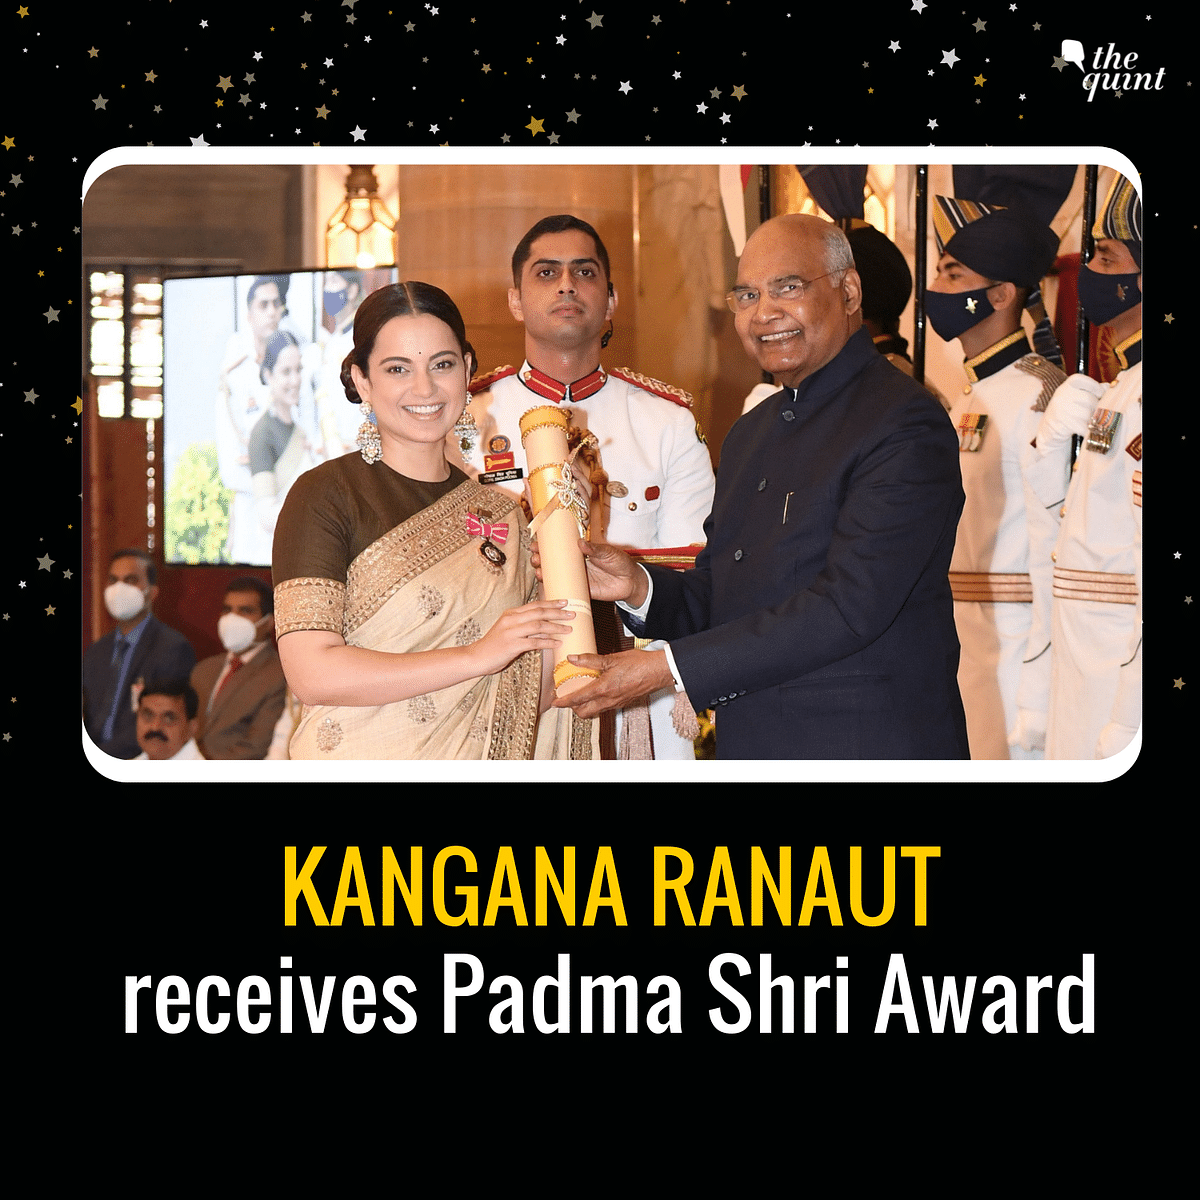 Swaraj's daughter accepted the award from President Kovind, while Jaitley's award was received by his wife.